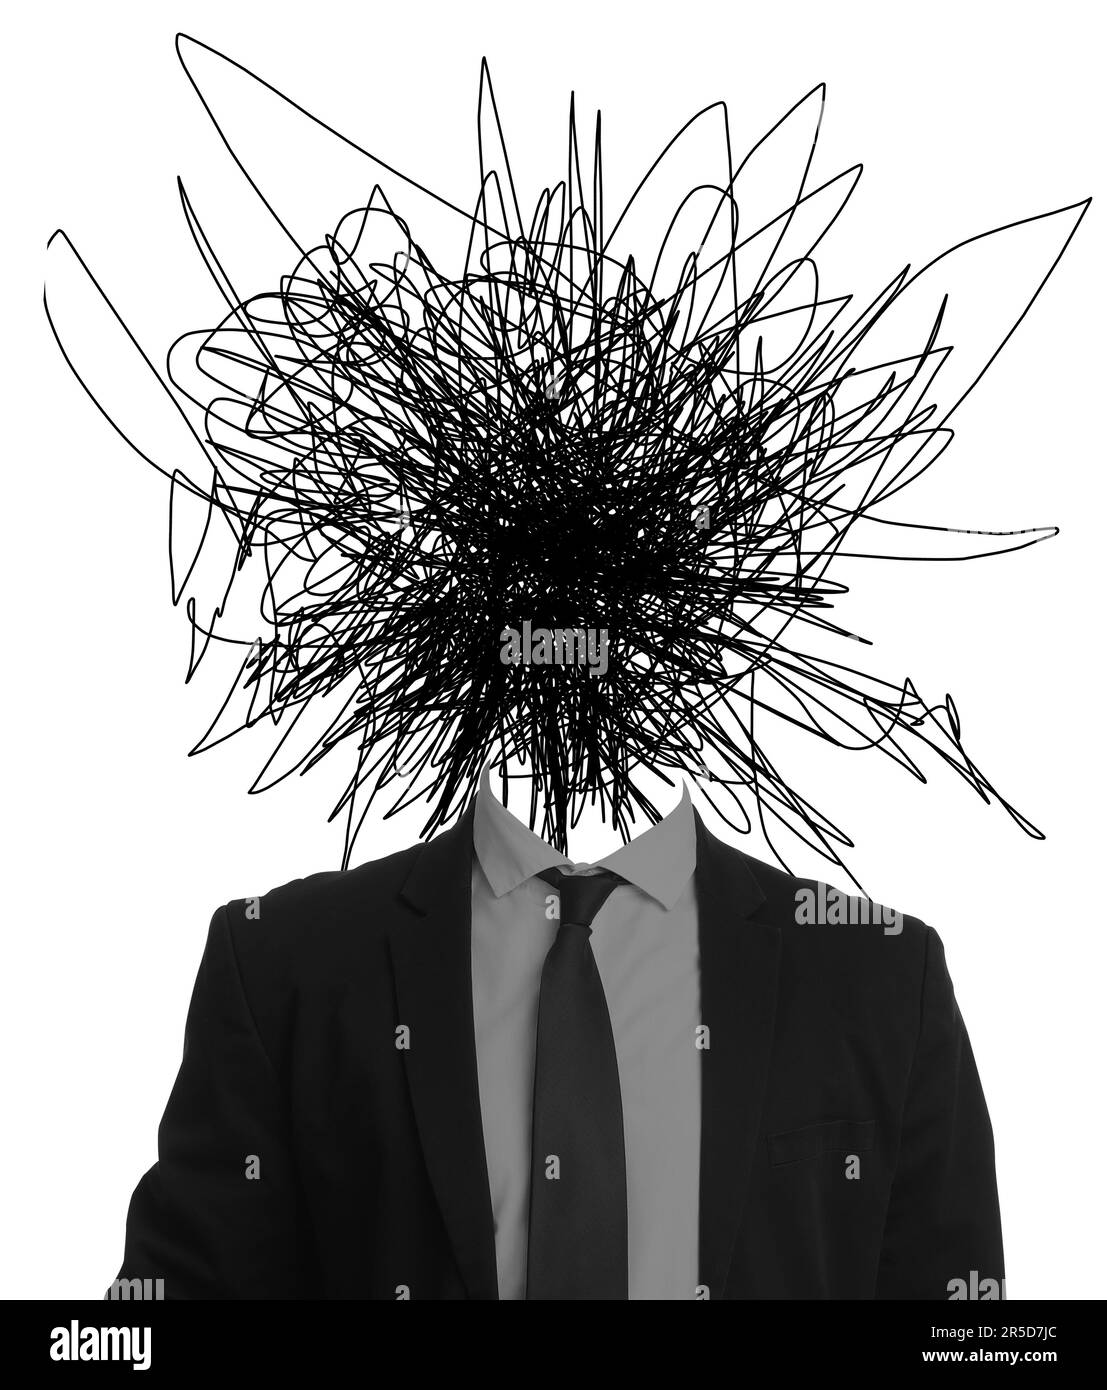 Creative artwork. Mess in head. Man with doodles instead of head on white background Stock Photo